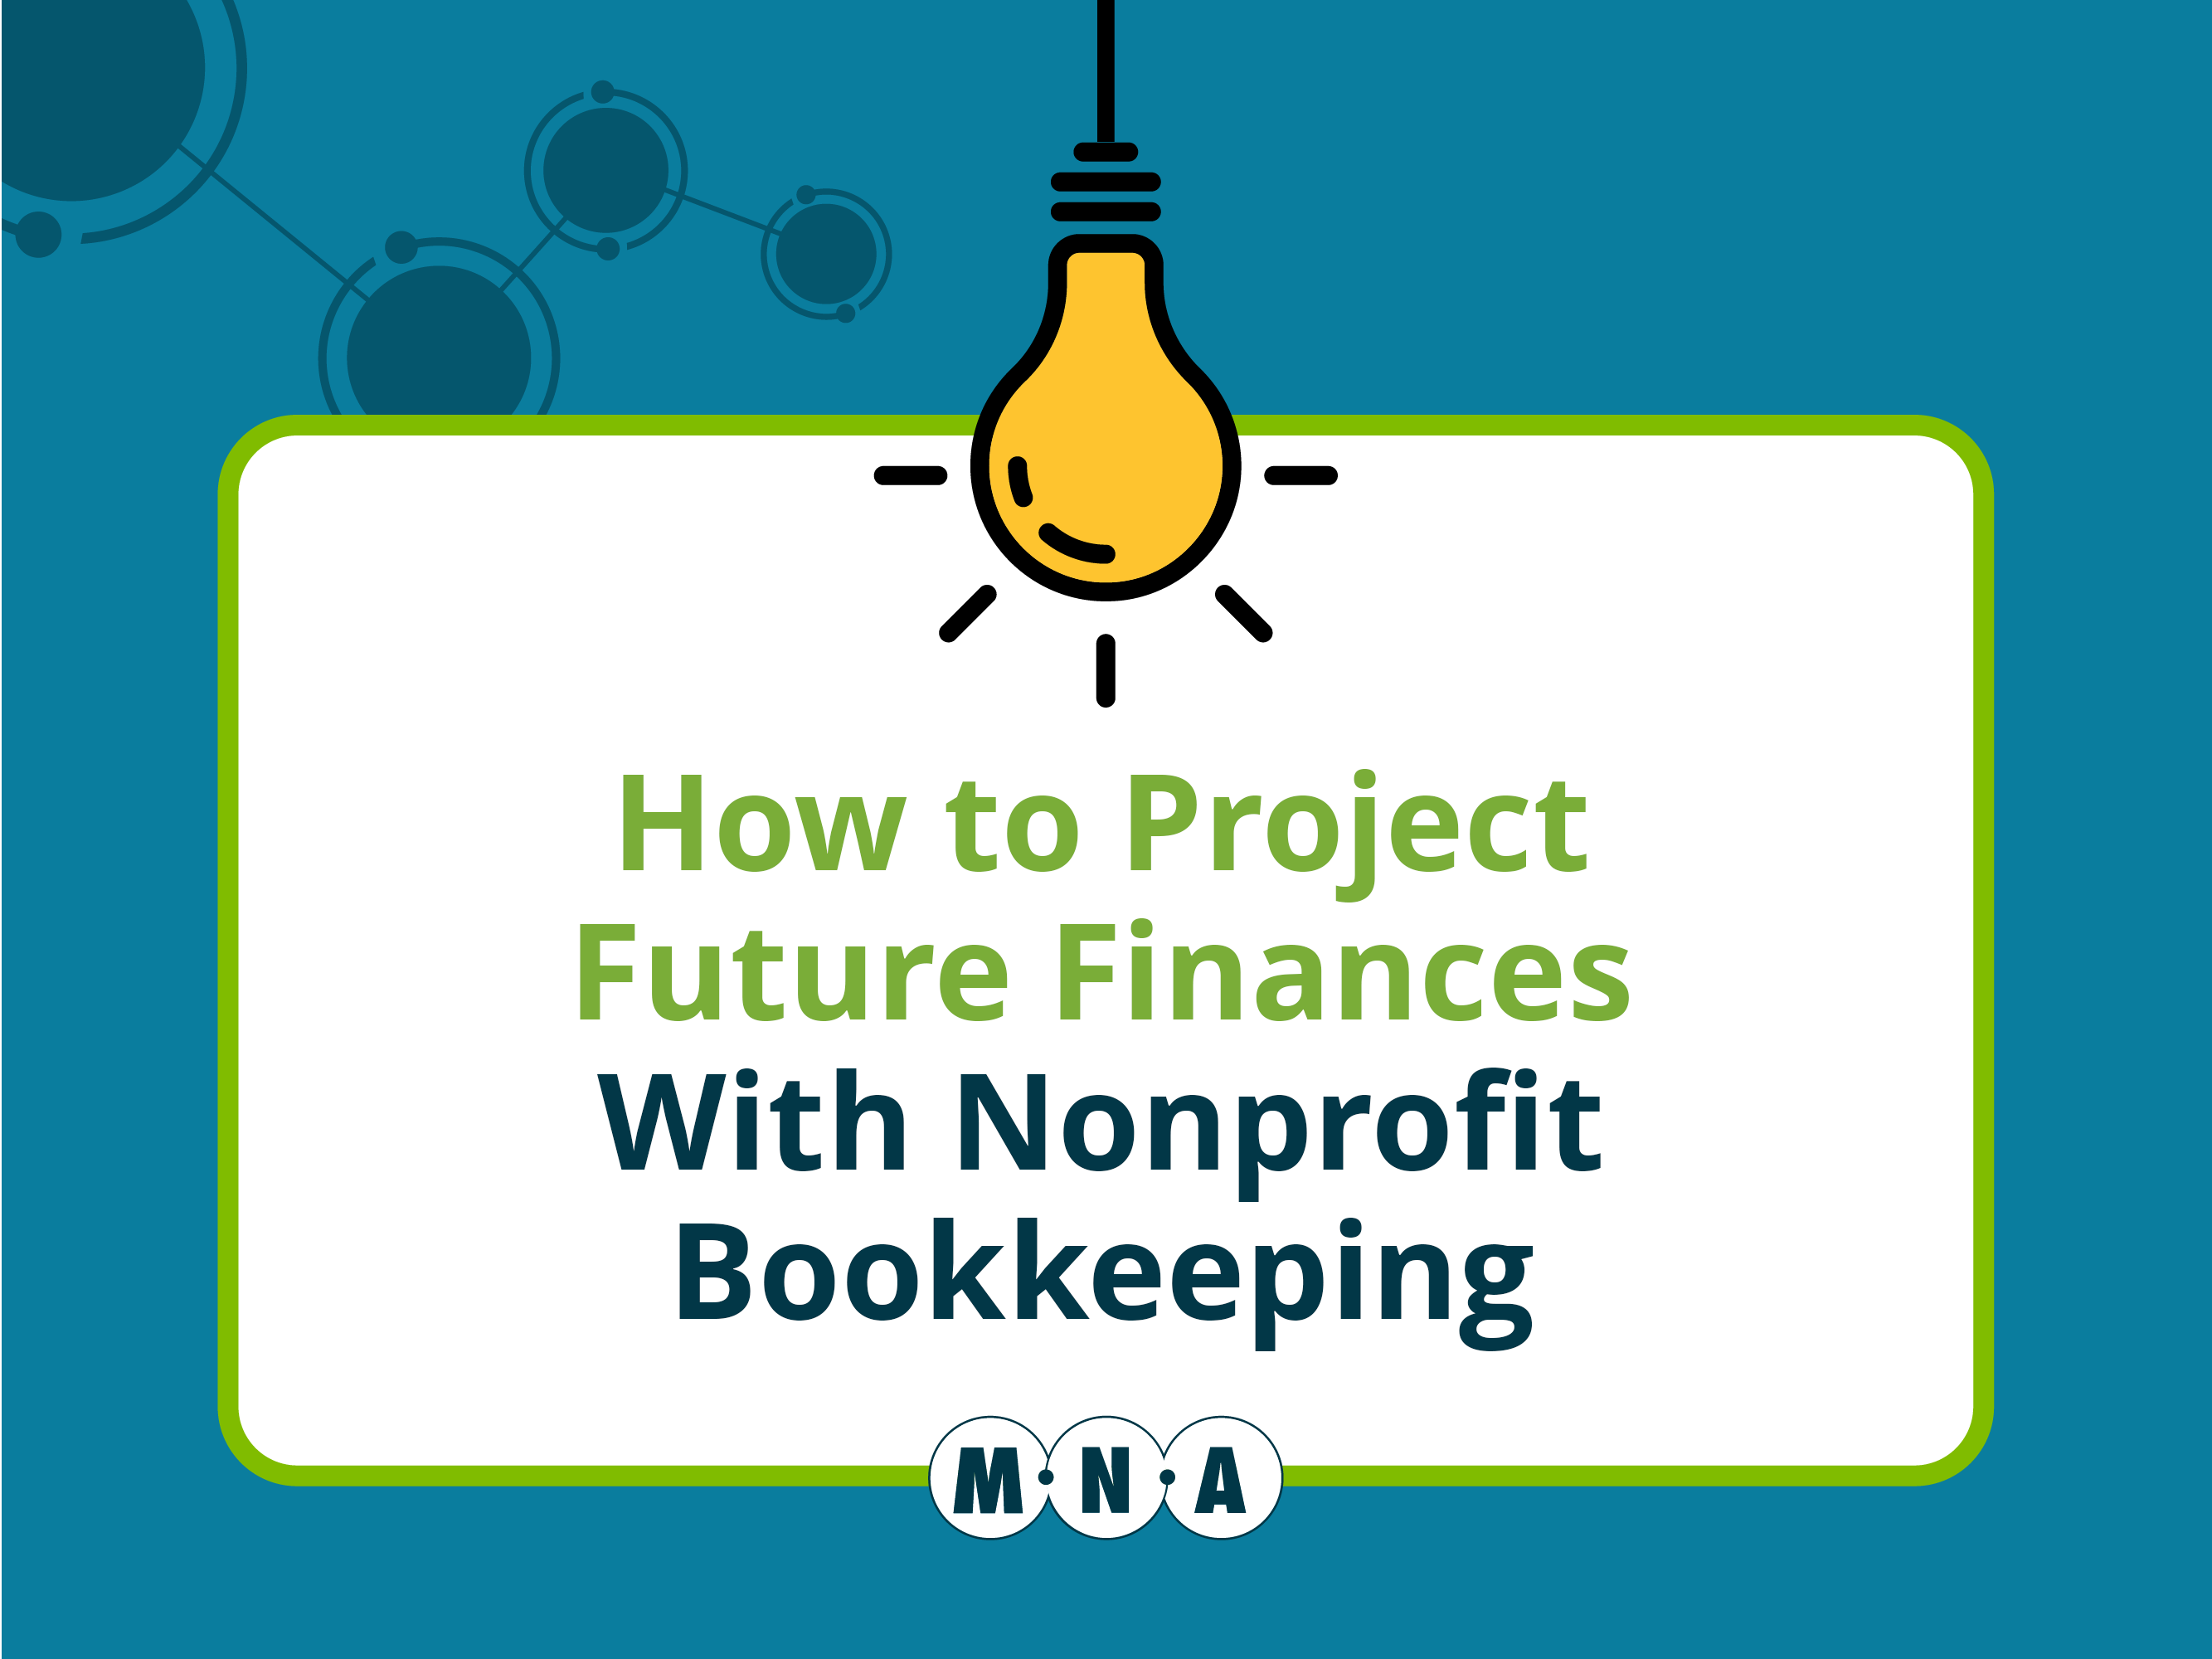 The title of the article, which is, “How to Project Future Finances With Nonprofit Bookkeeping.